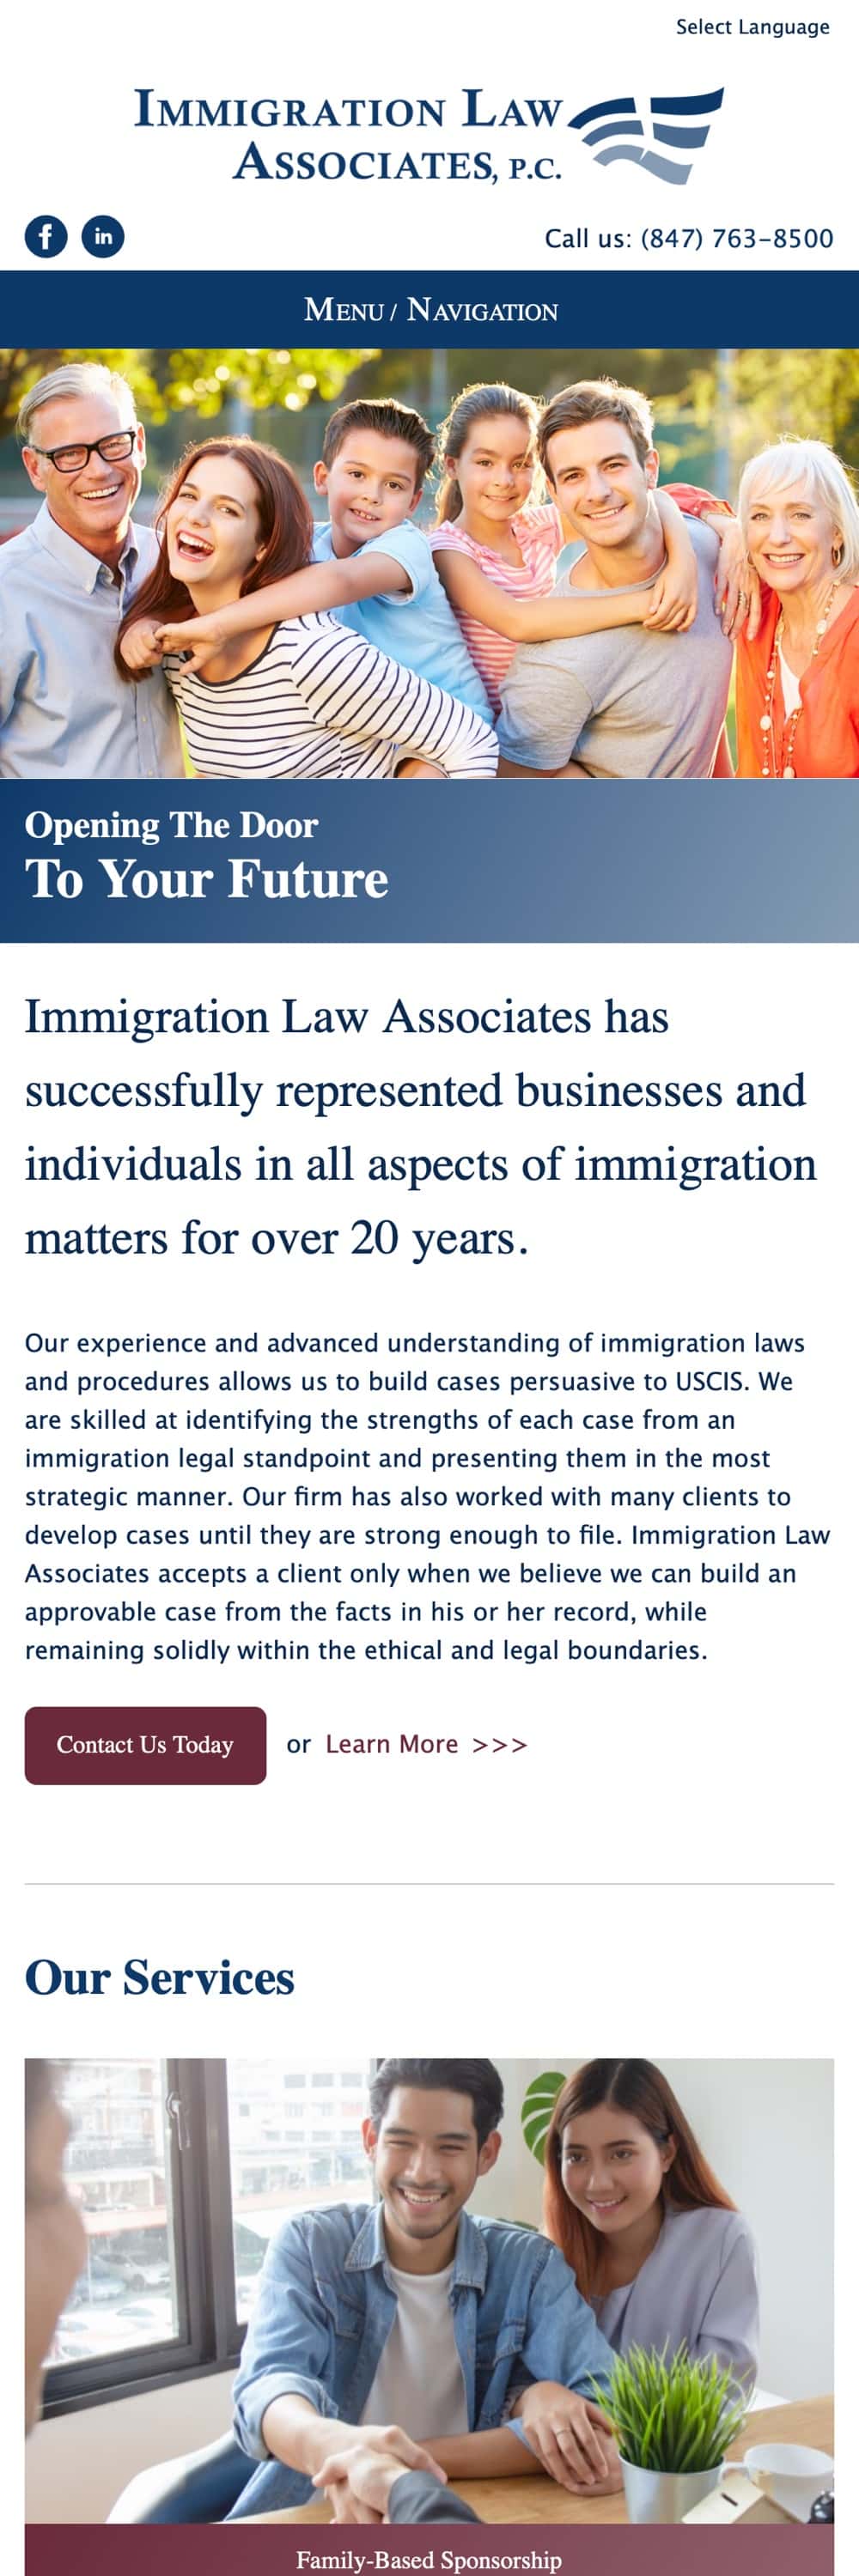 screen shot of the Immigration Law Associates website home page